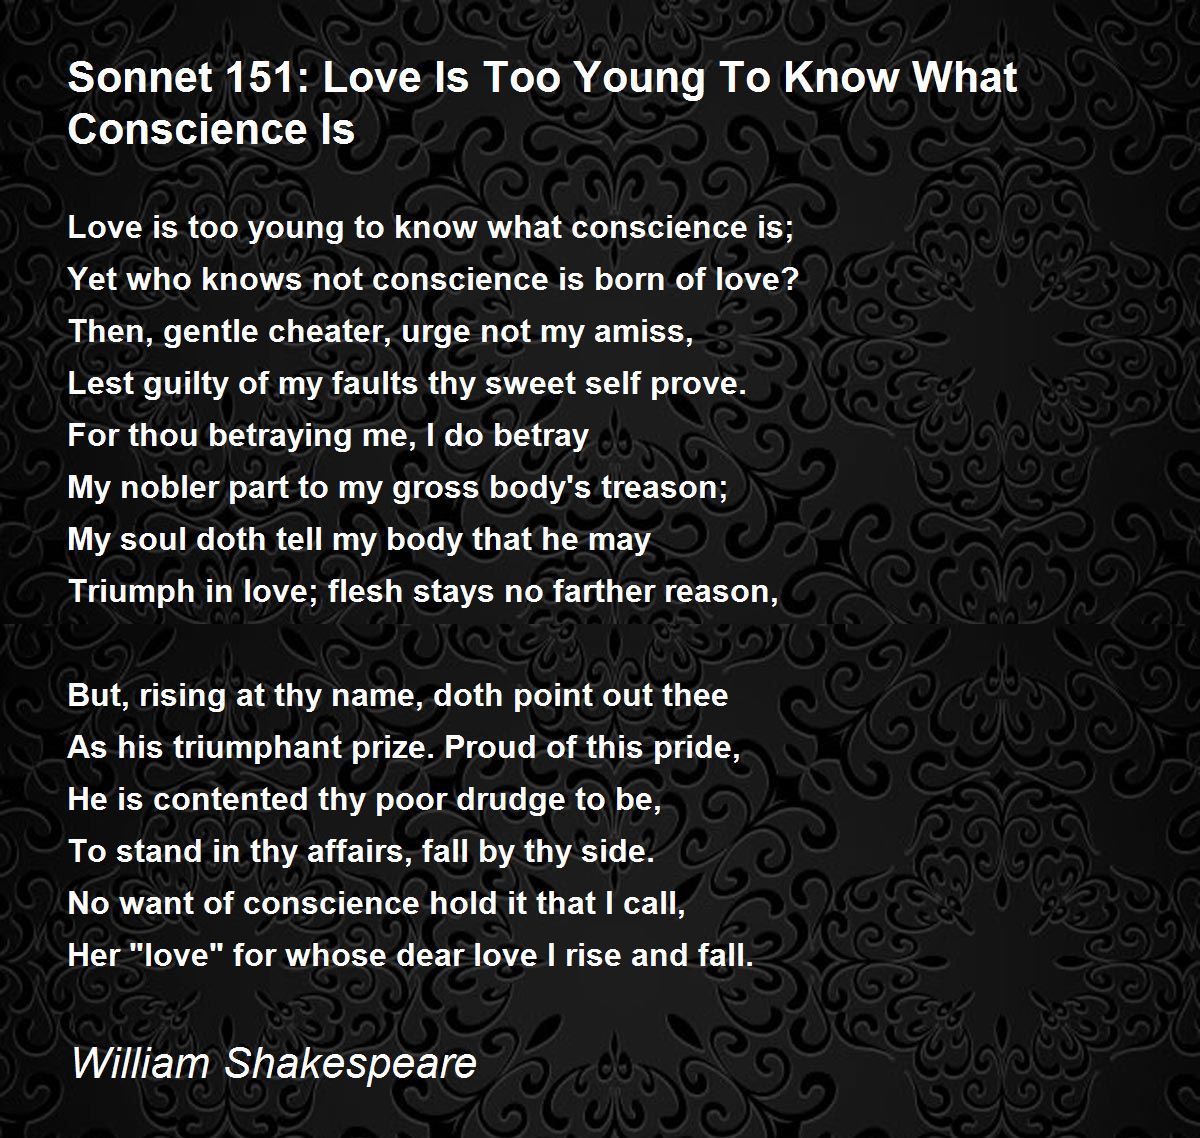 shakespearean love sonnet examples by students